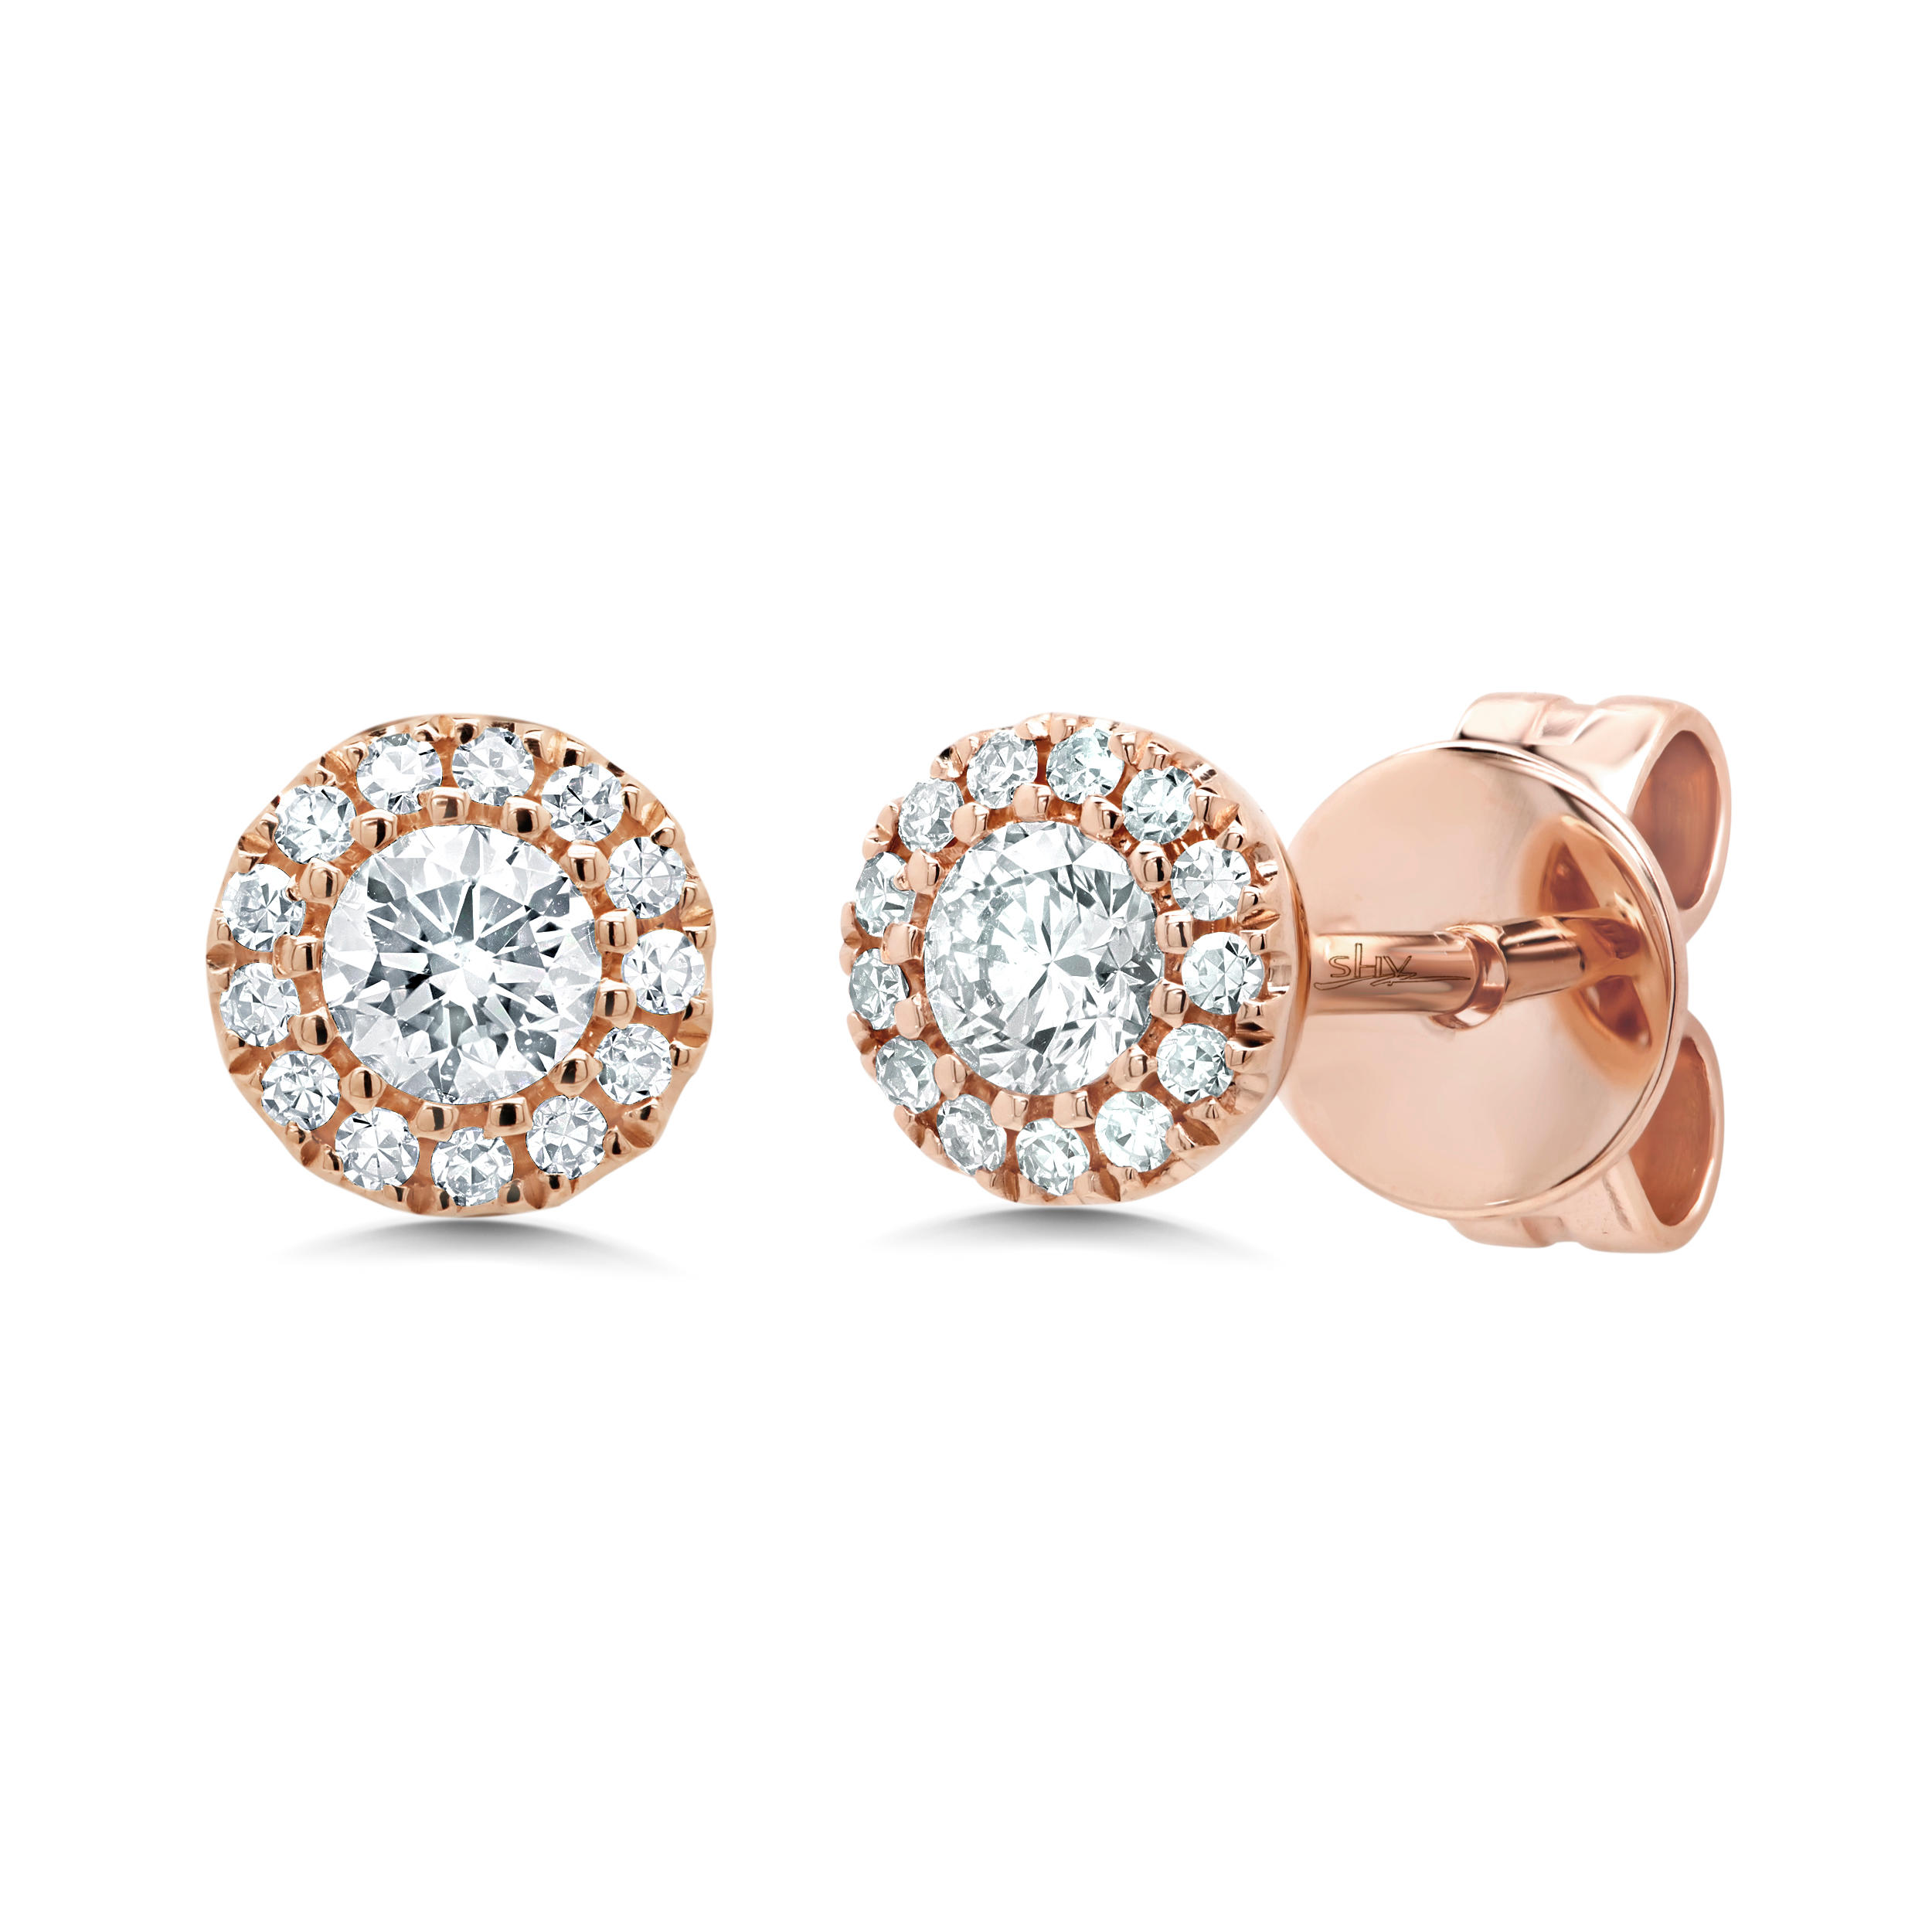 Rose gold diamond earrings from Shy Creation